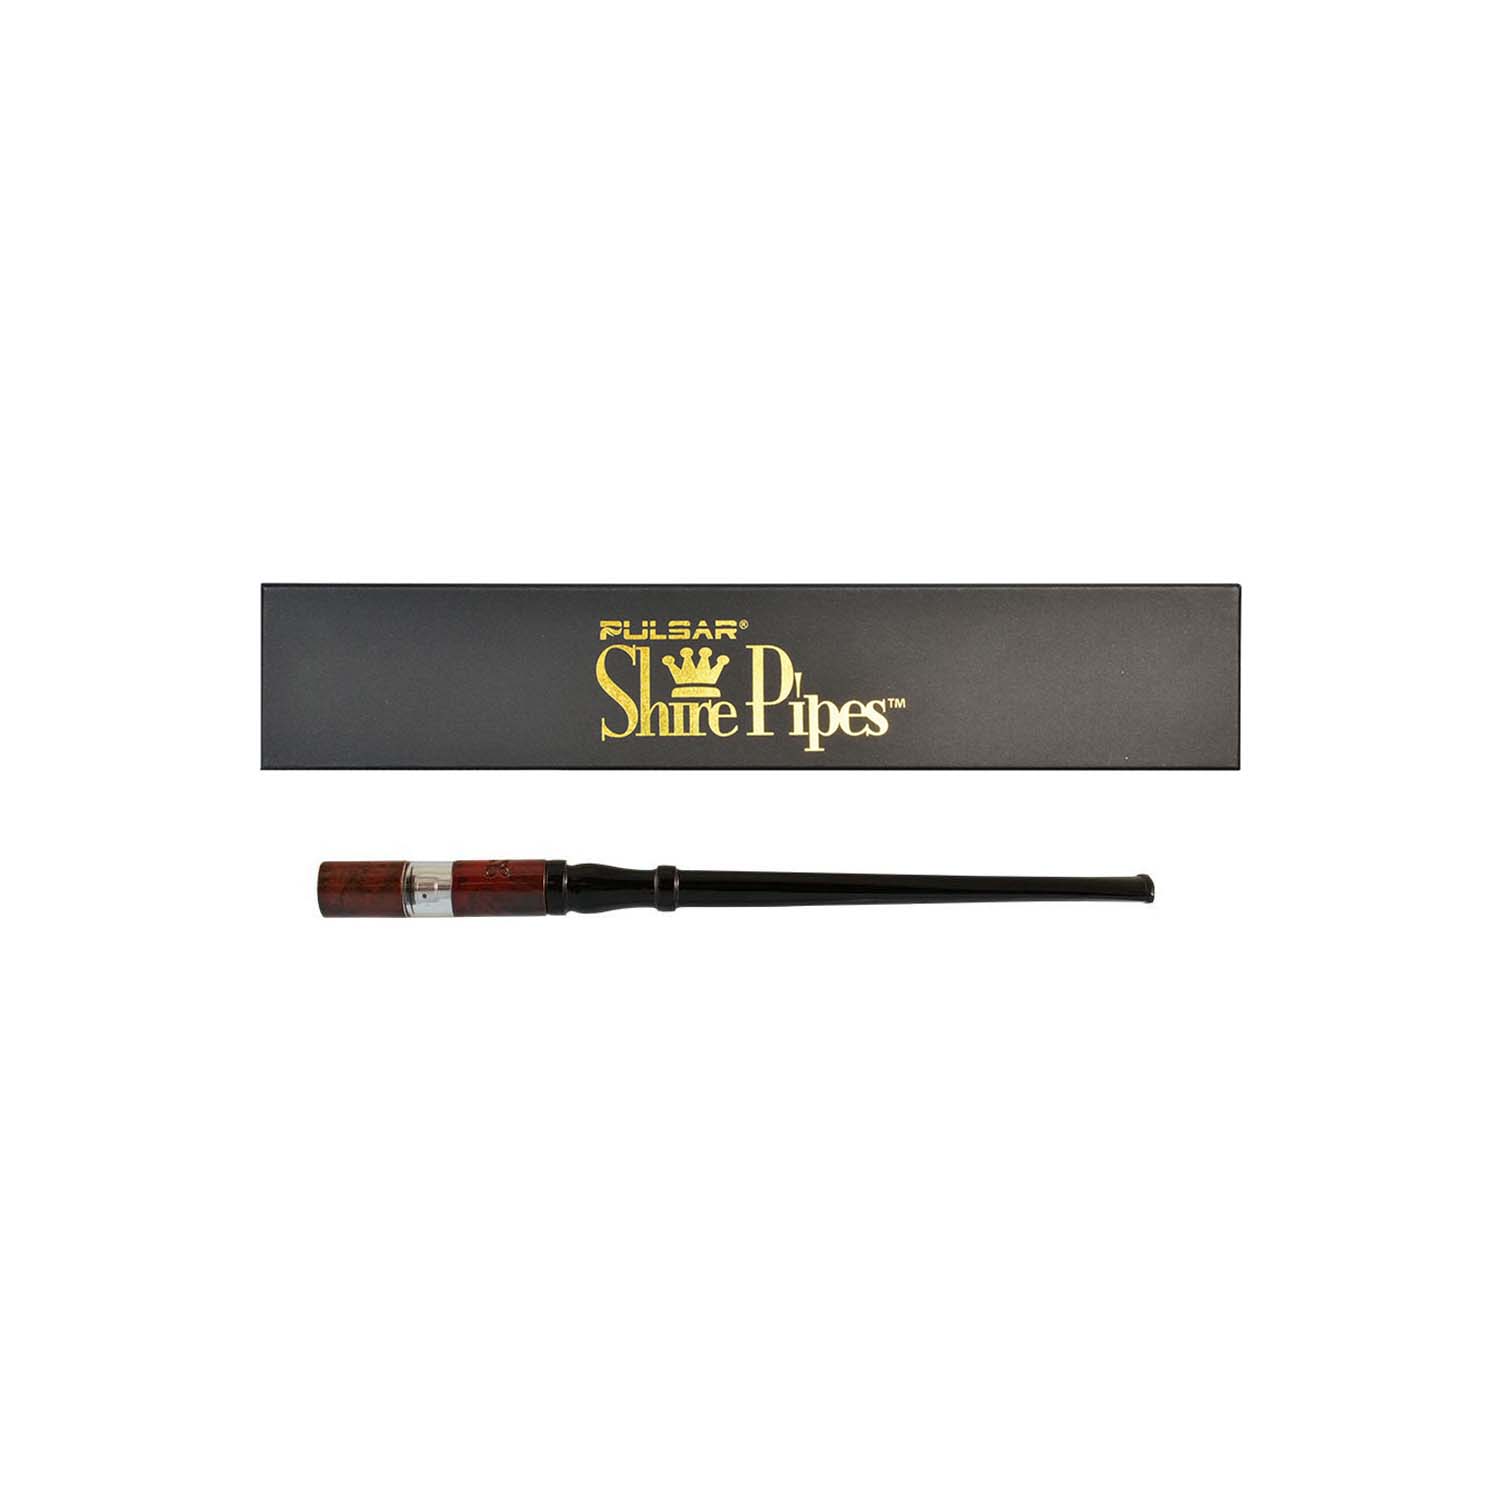 Pulsar Shire Pipes Reusable Cherry Wood Cigarette Holder